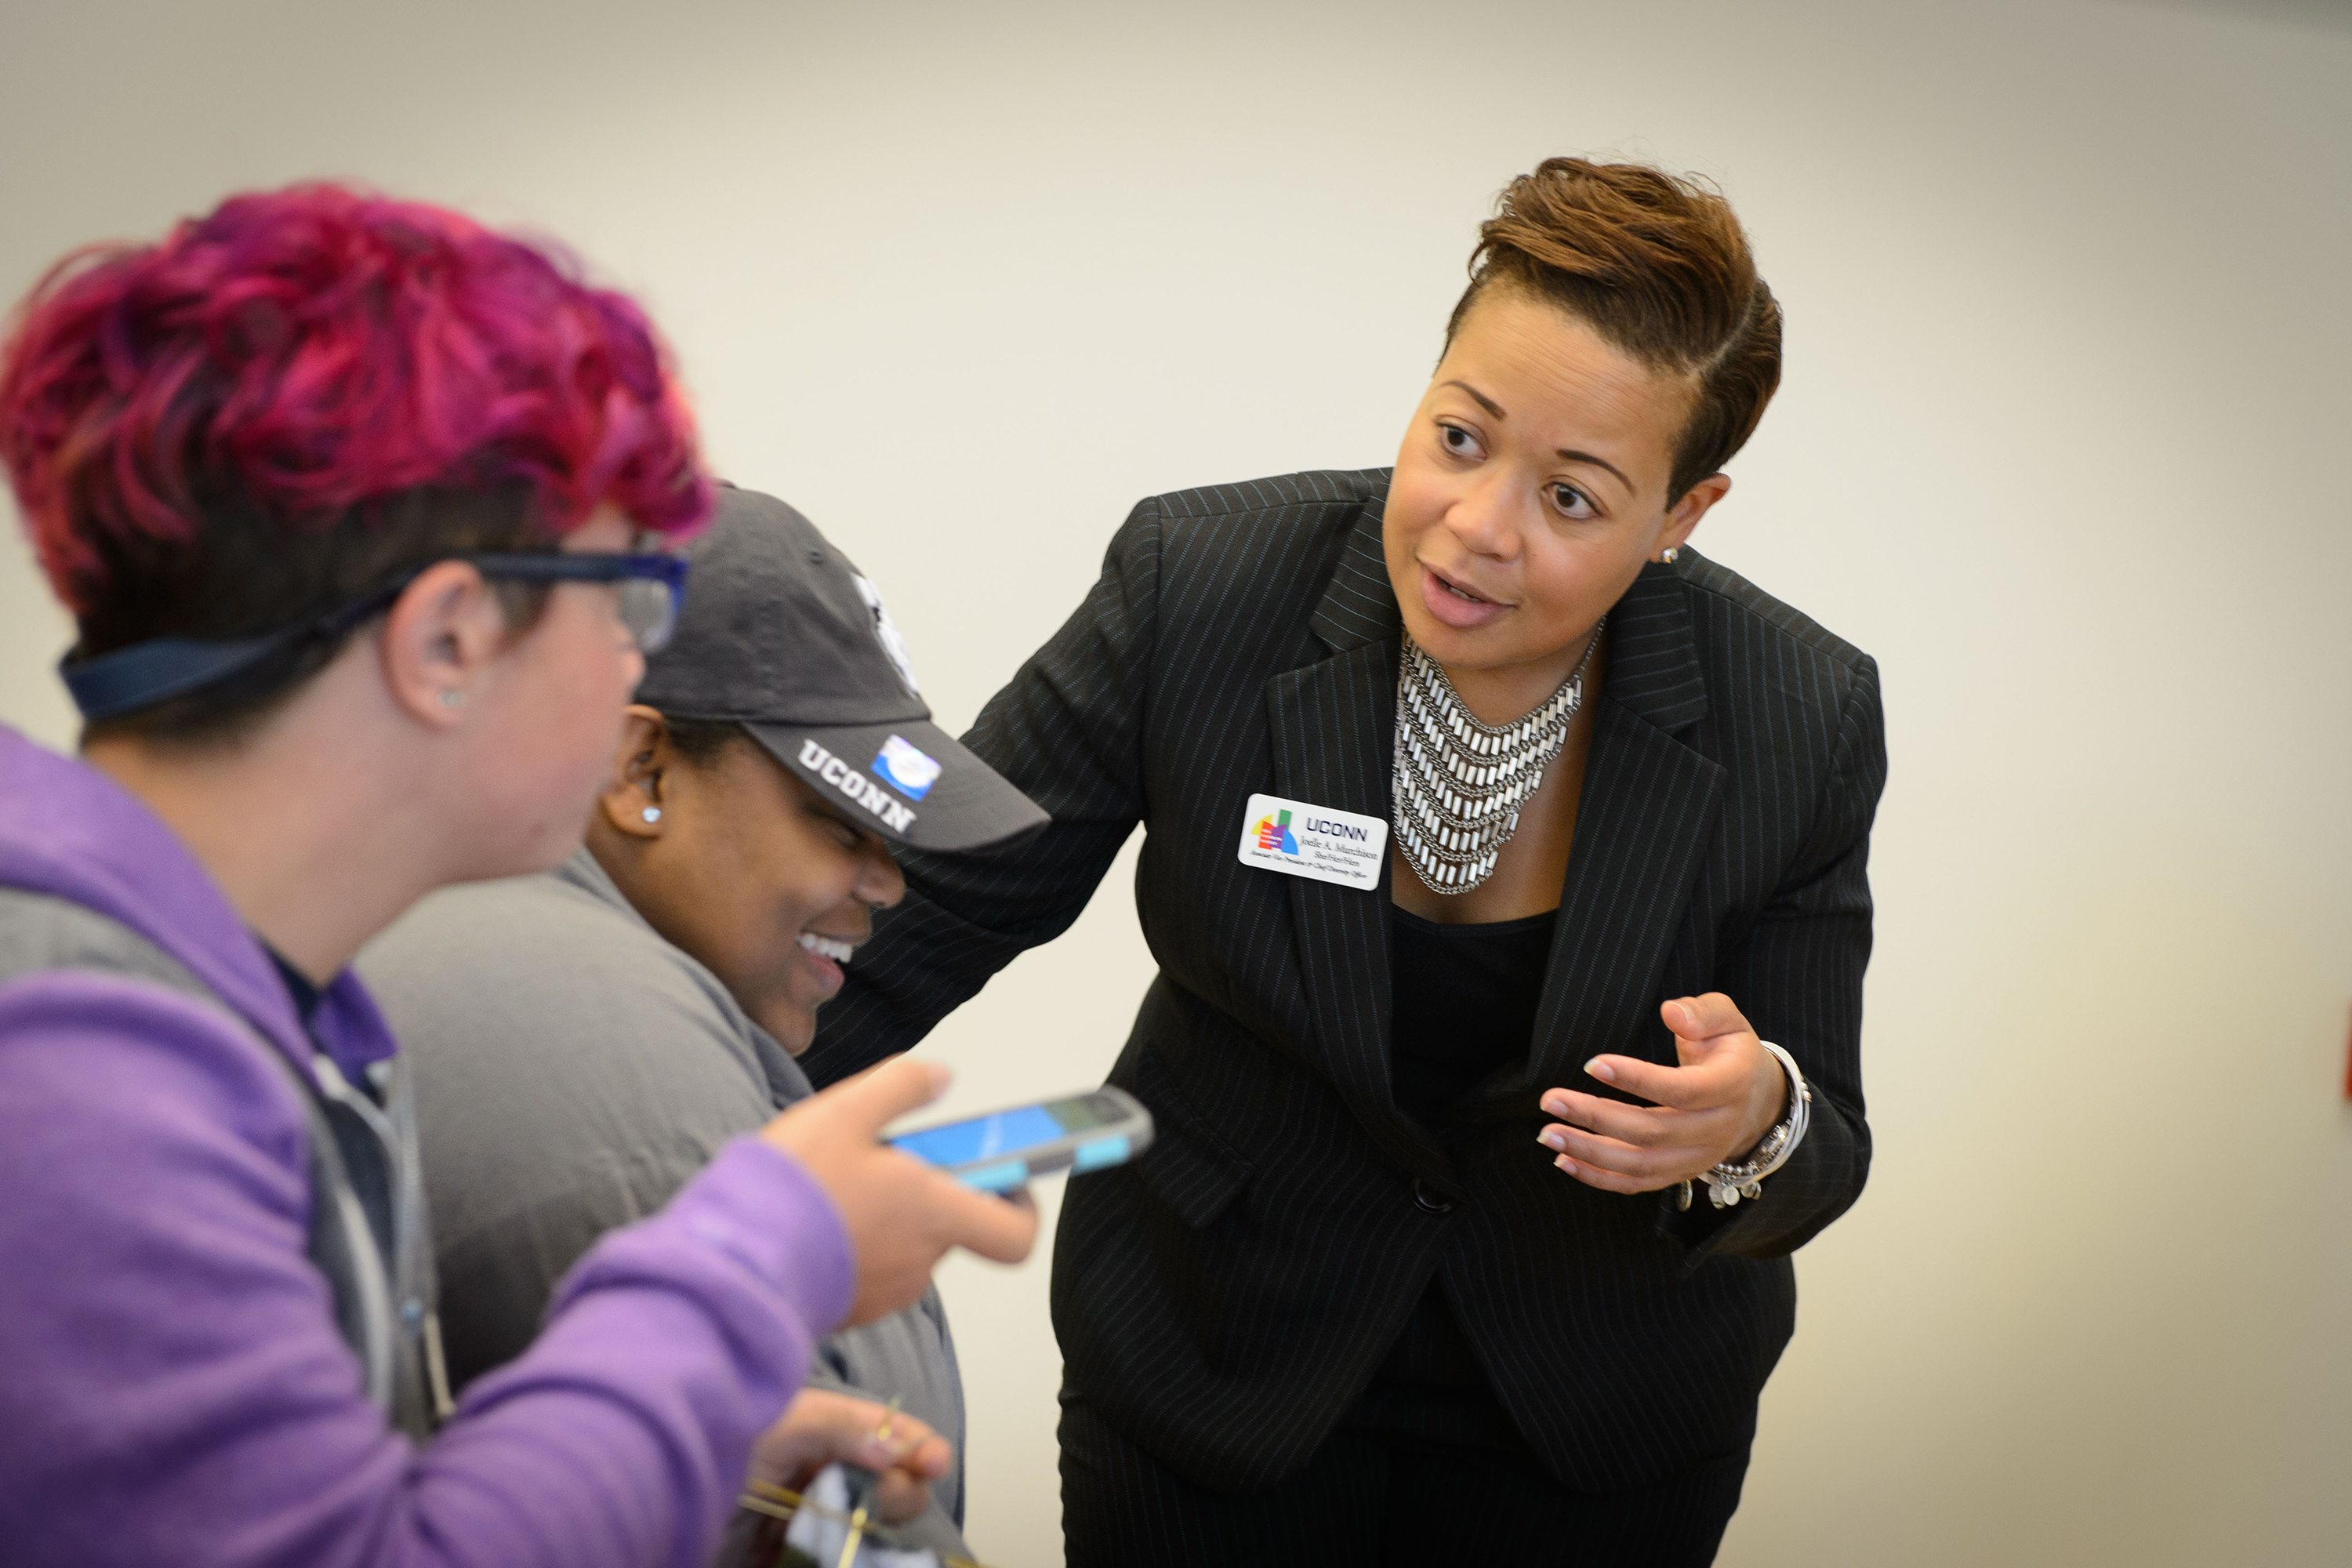 Associate vice president and chief diversity officer Joelle Murchison speaks with students before a forum on the recent violence seen in Orlando held at the Student Union Ballroom on Oct. 4, 2016. (Peter Morenus/UConn Photo)